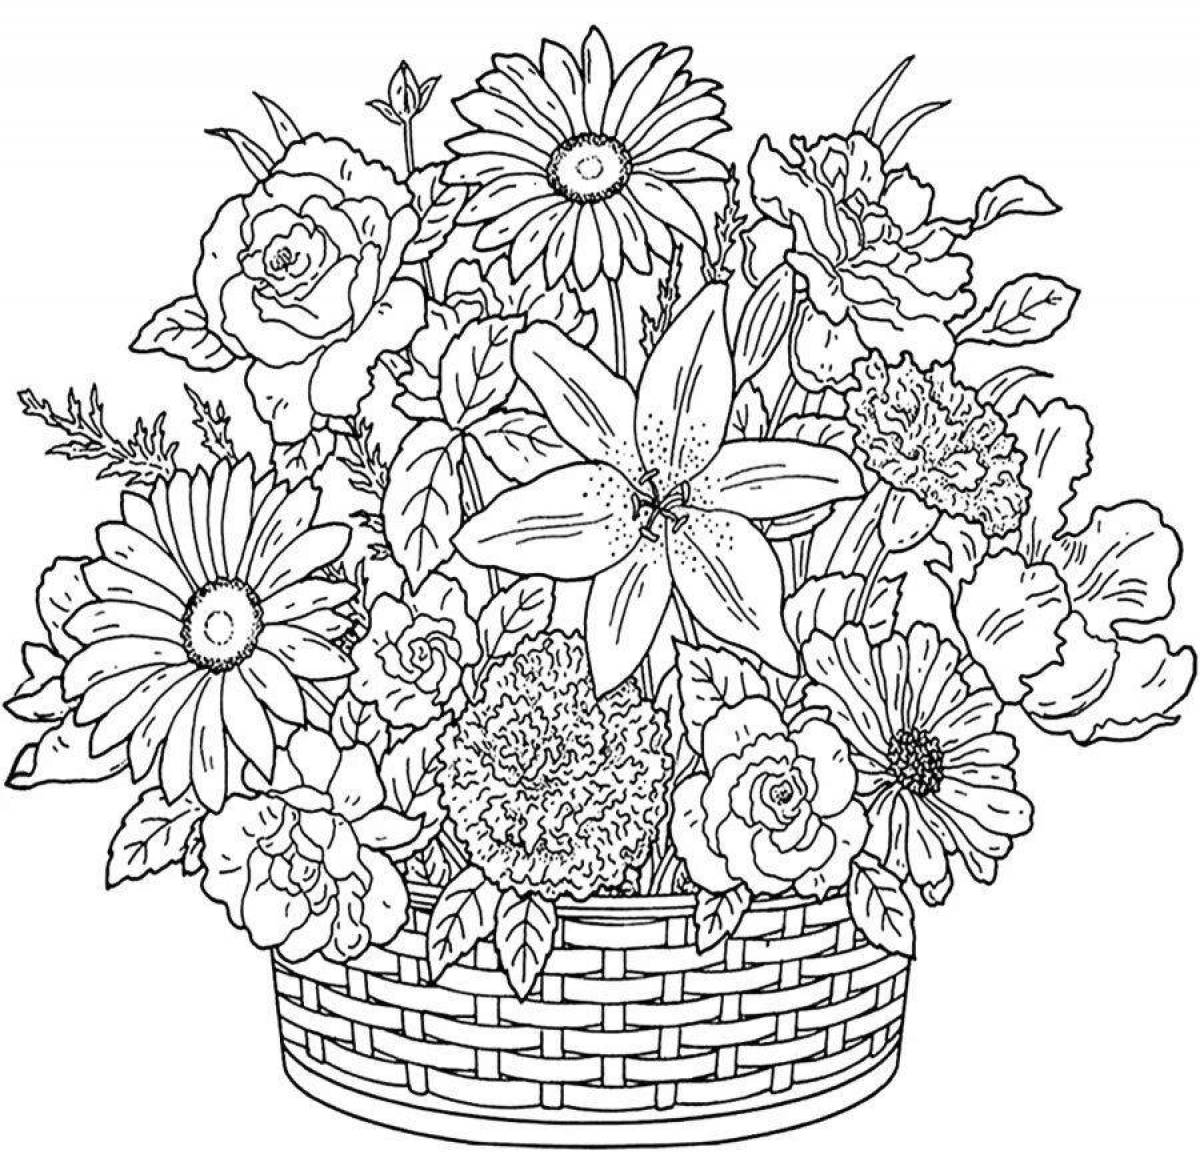 Charming coloring bouquets of flowers